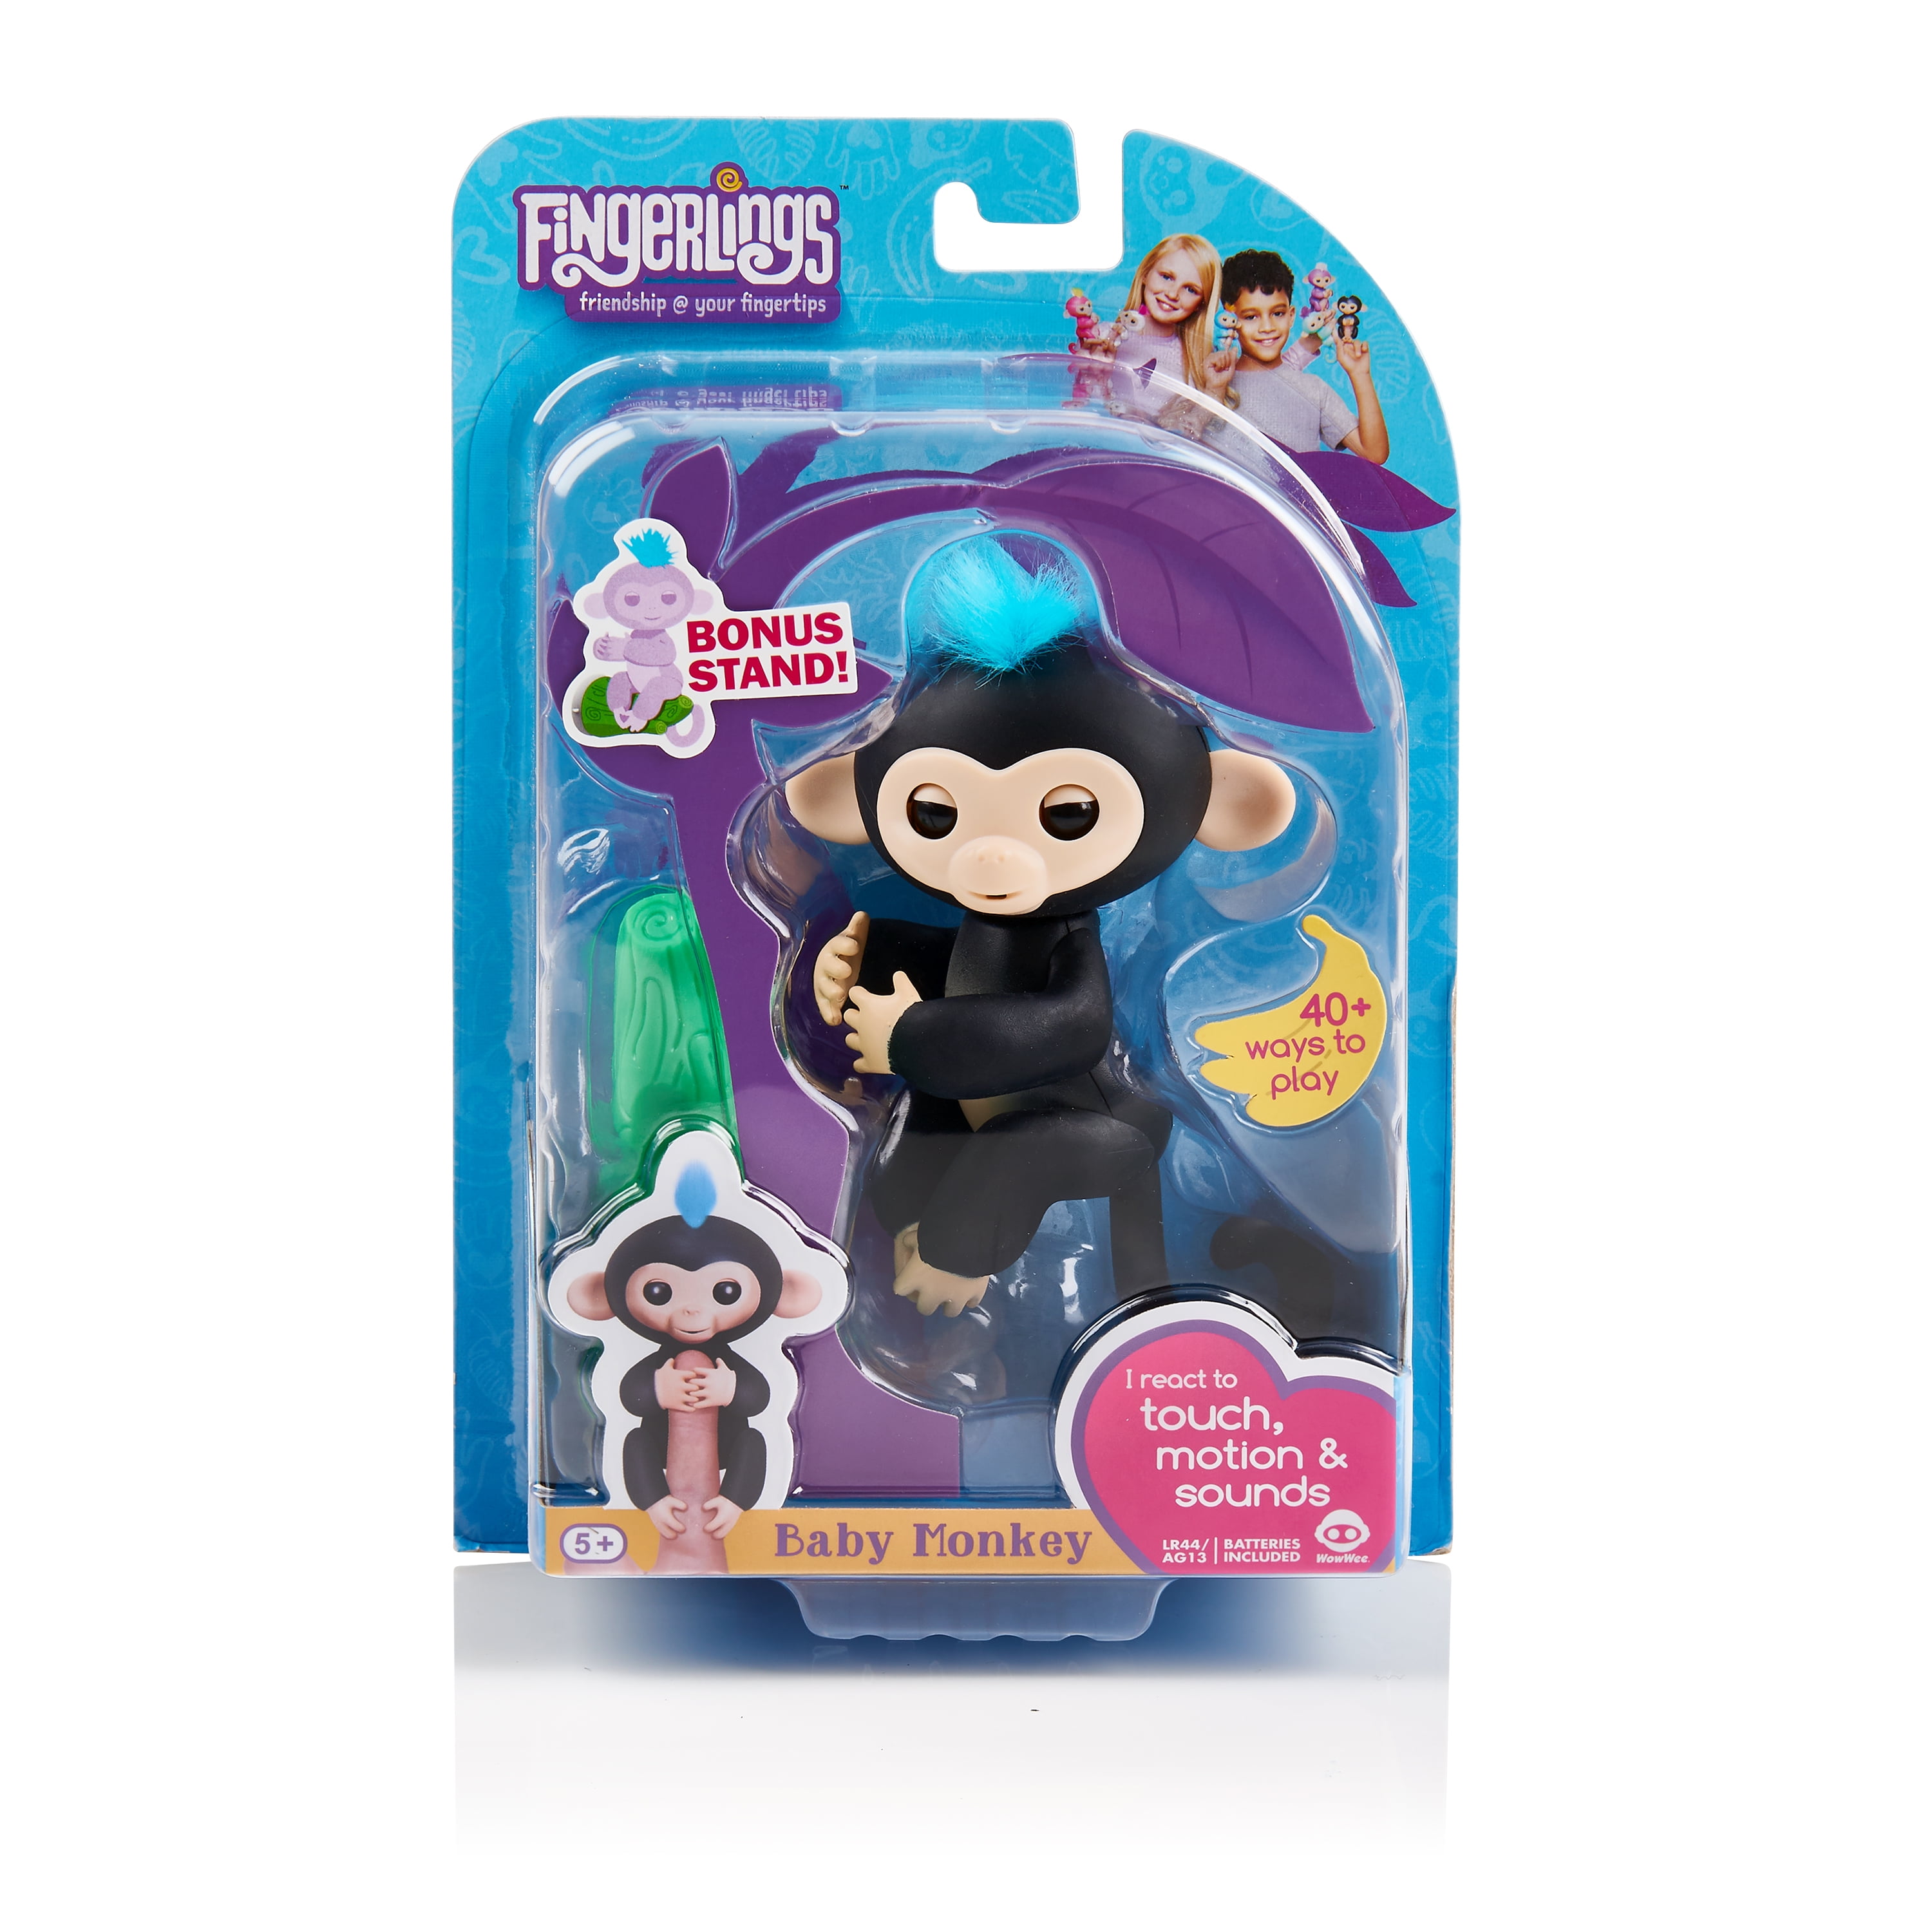 WowWee Fingerlings Baby Monkey Finn Black With Bonus Stand 100 Authentic for sale online 